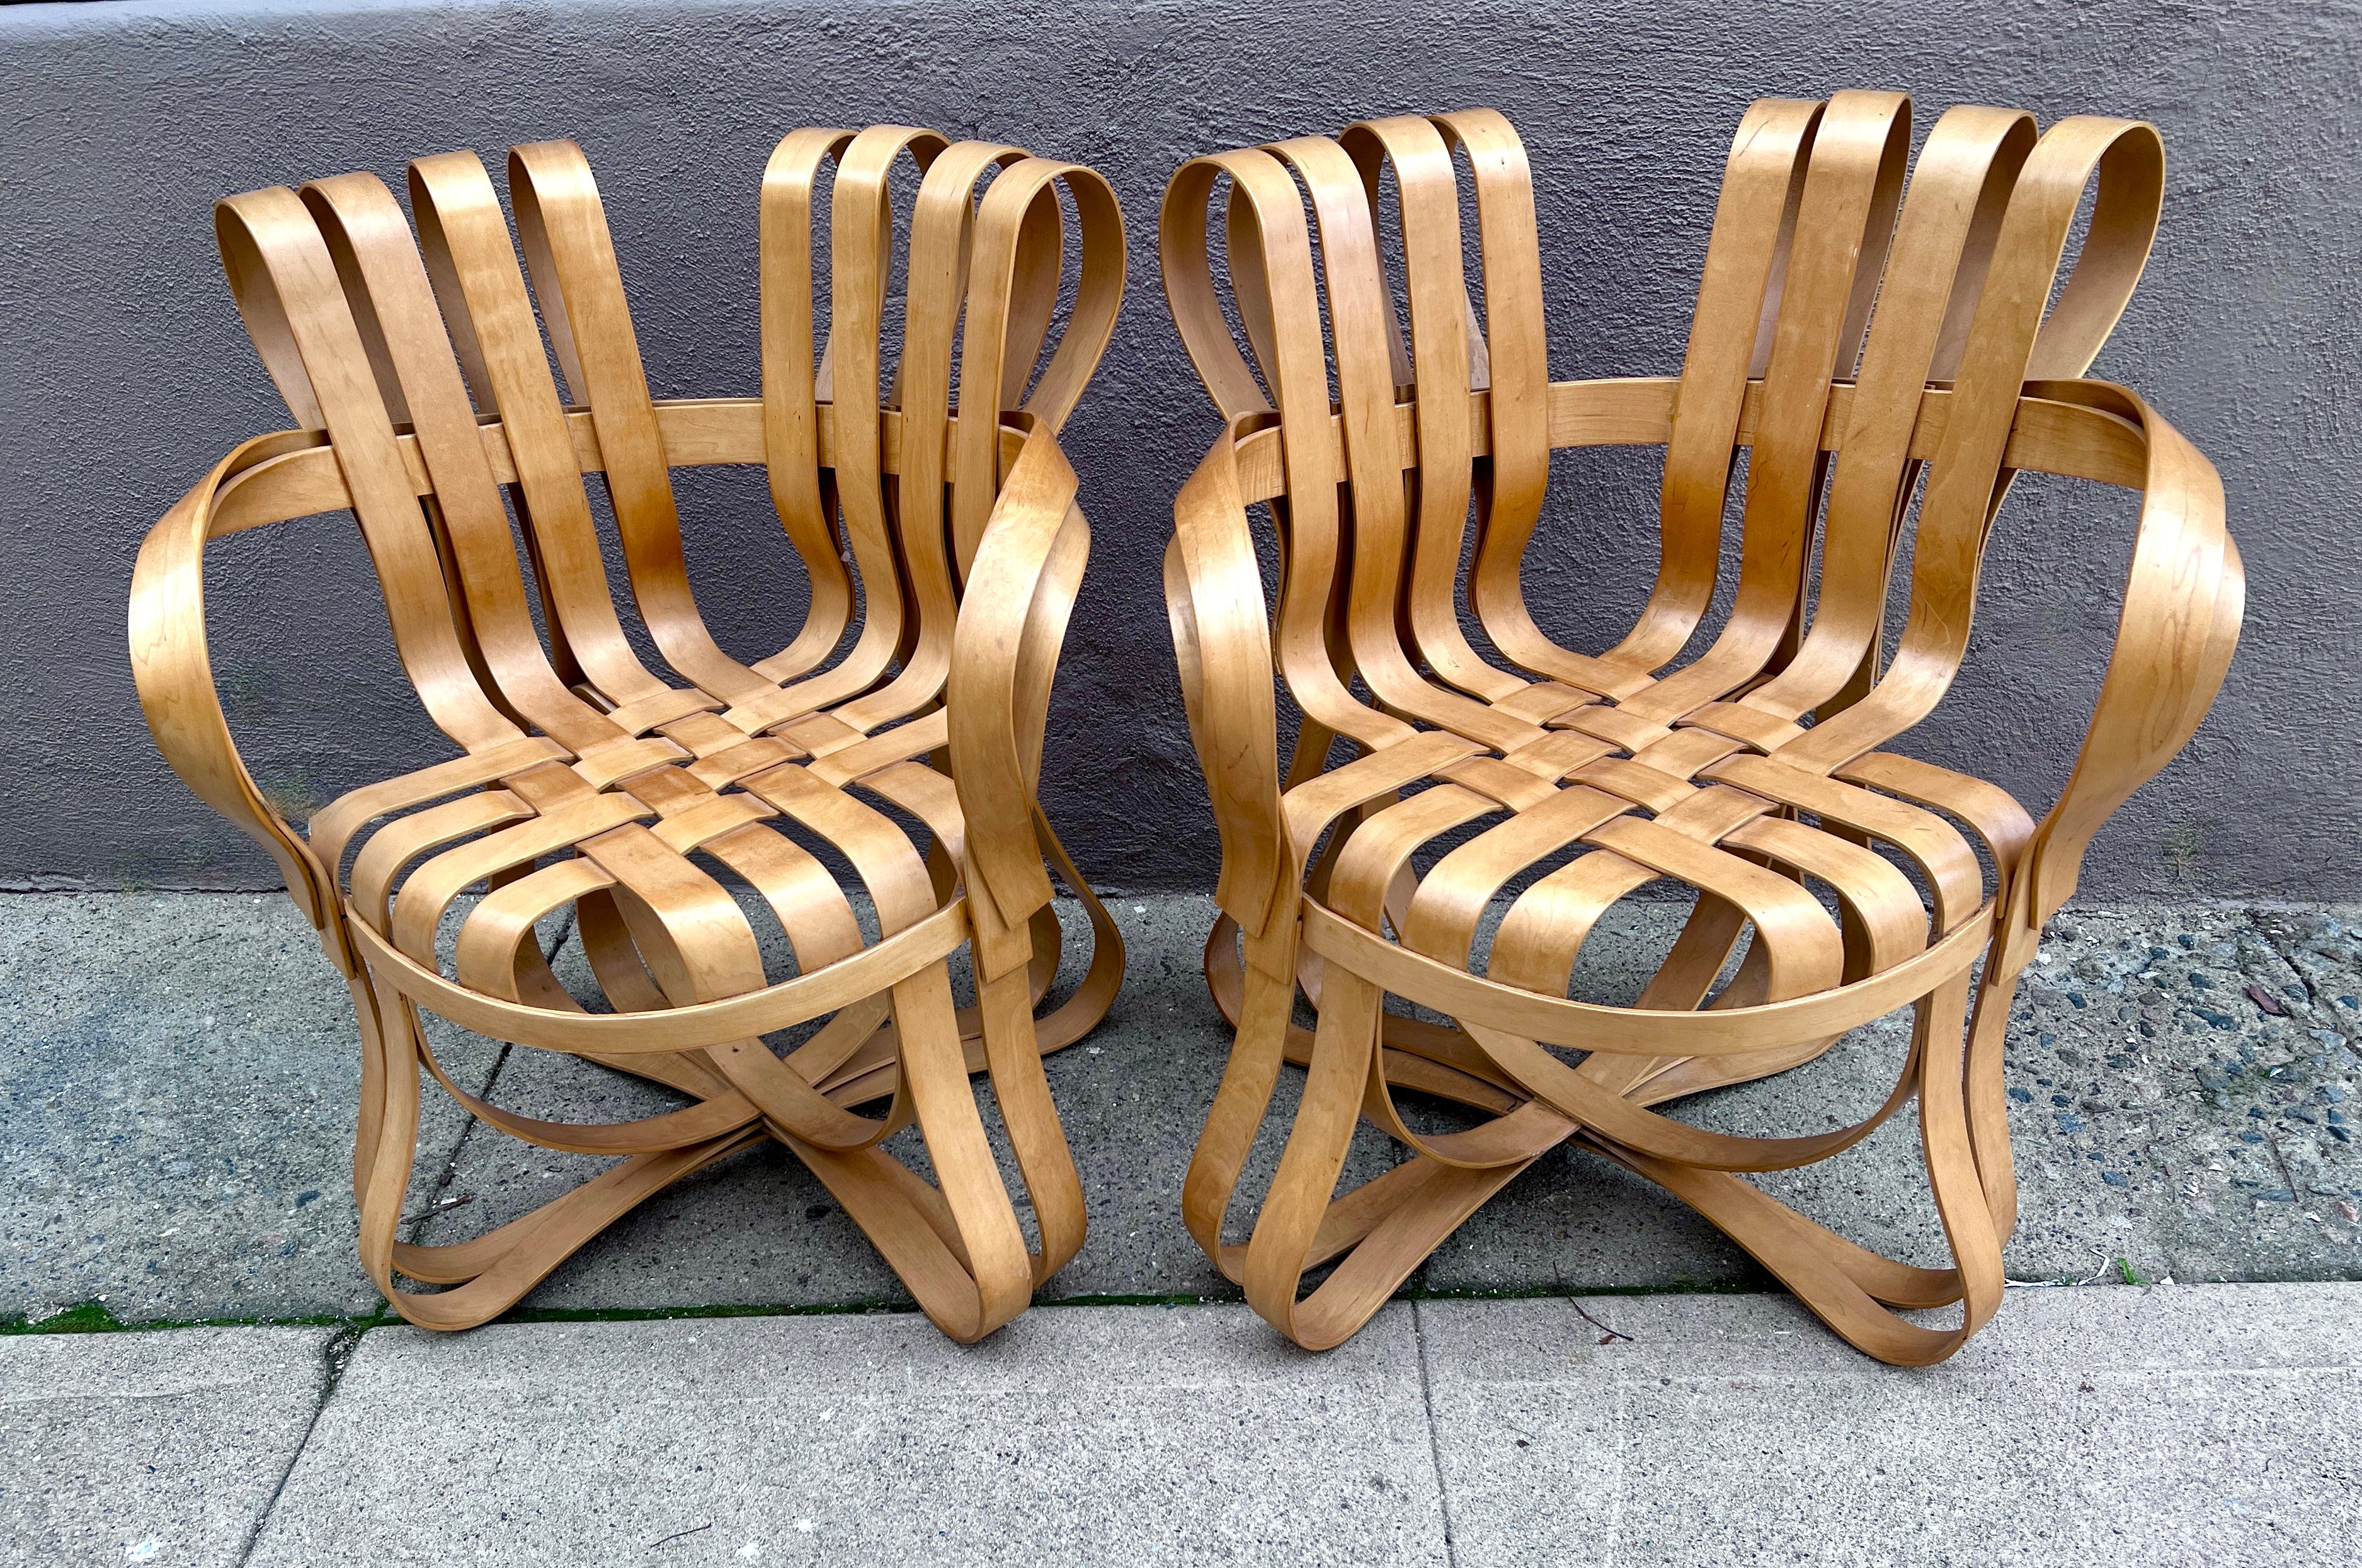 Pair of Frank Gehry Cross Check Chairs.  The chairs are made of Maple Bentwood Ribbon-like pieces, crossed and bent to work together to form, not only very unique design, but effectively sturdy piece for any room in the home.  The back of chairs